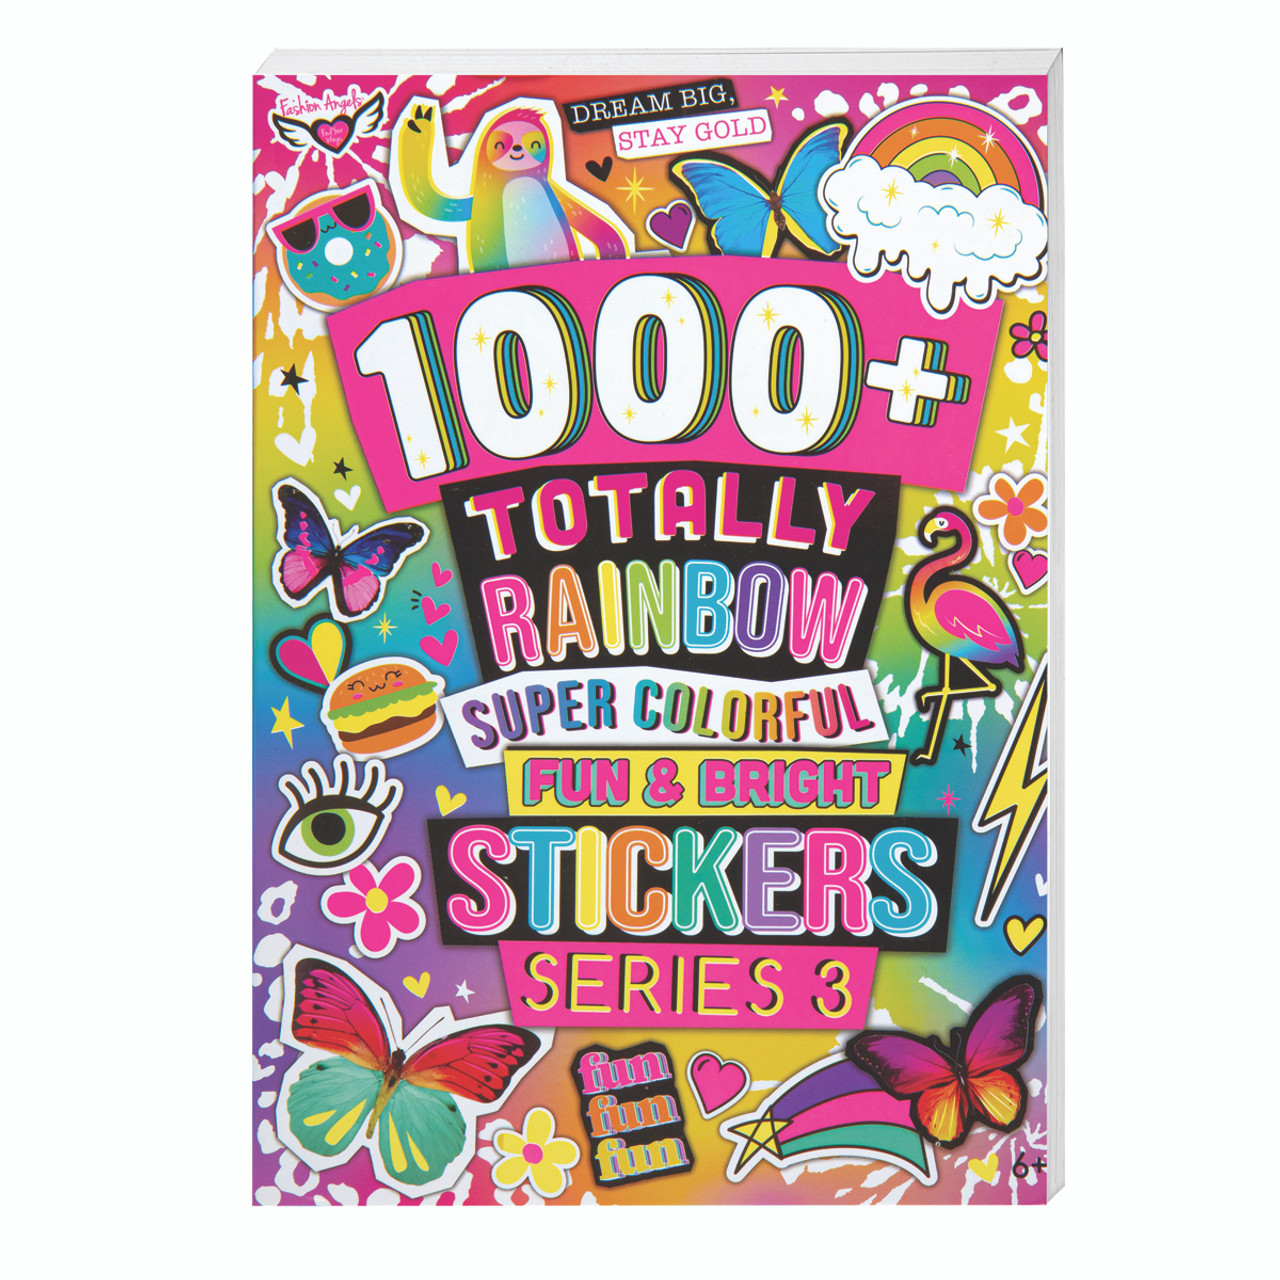 77809 1000+ Totally Rainbow Super Colorful Stickers - Lindens Dancewear